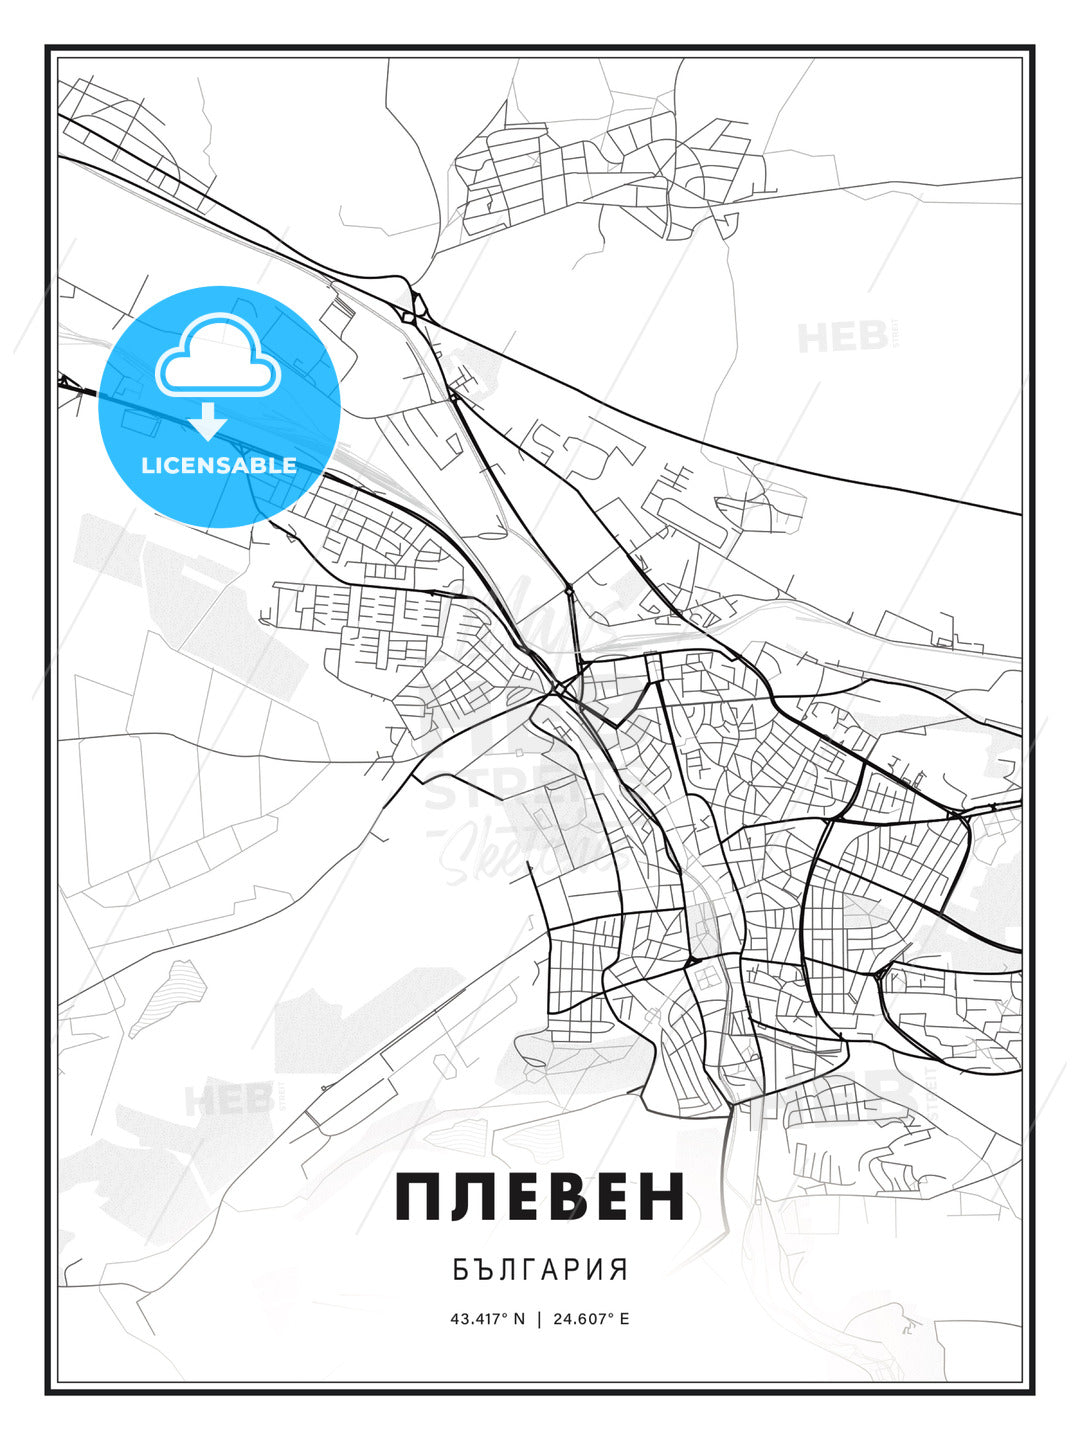 ПЛЕВЕН / Pleven, Bulgaria, Modern Print Template in Various Formats - HEBSTREITS Sketches